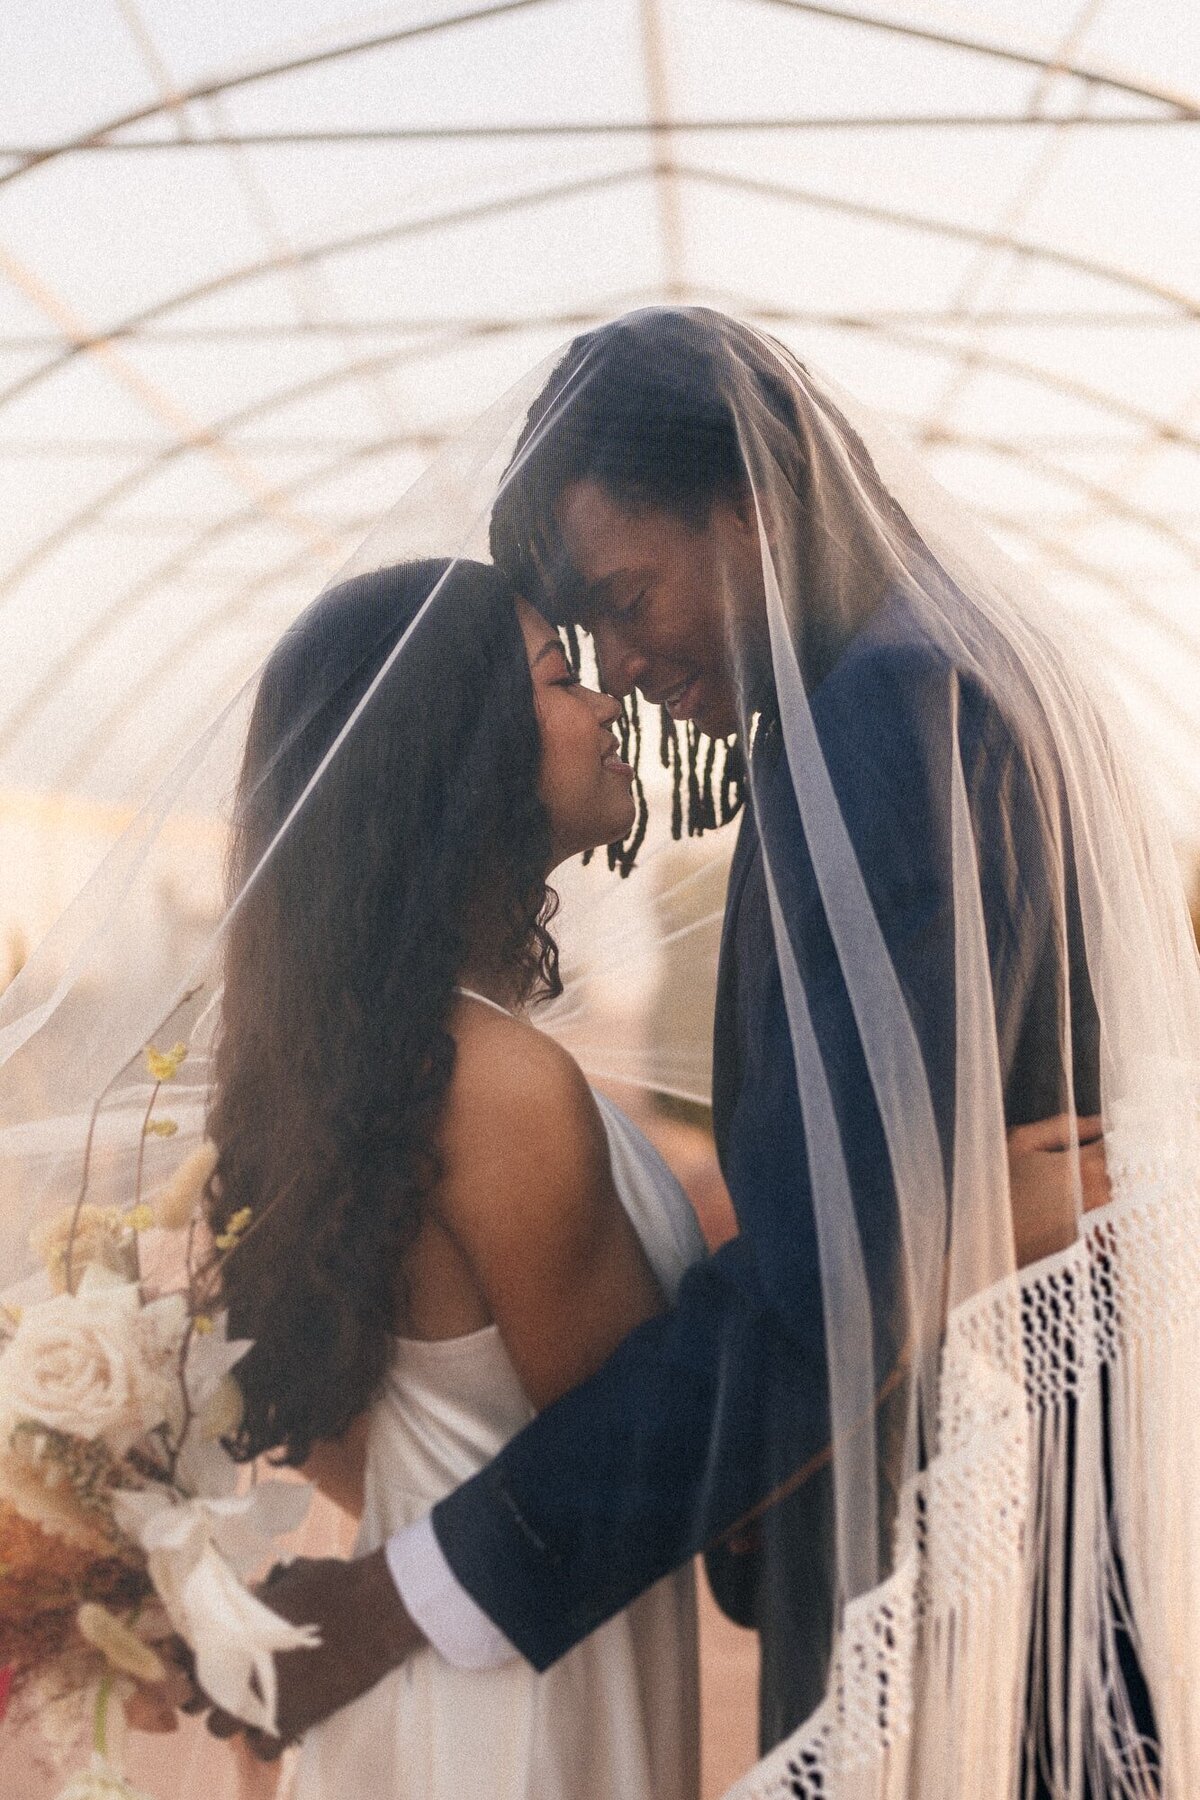 Cherished couple, surrounded by the veil's soft embrace, creating magical memories during their wedding photos at Cactus Joe's in the heart of Las Vegas.